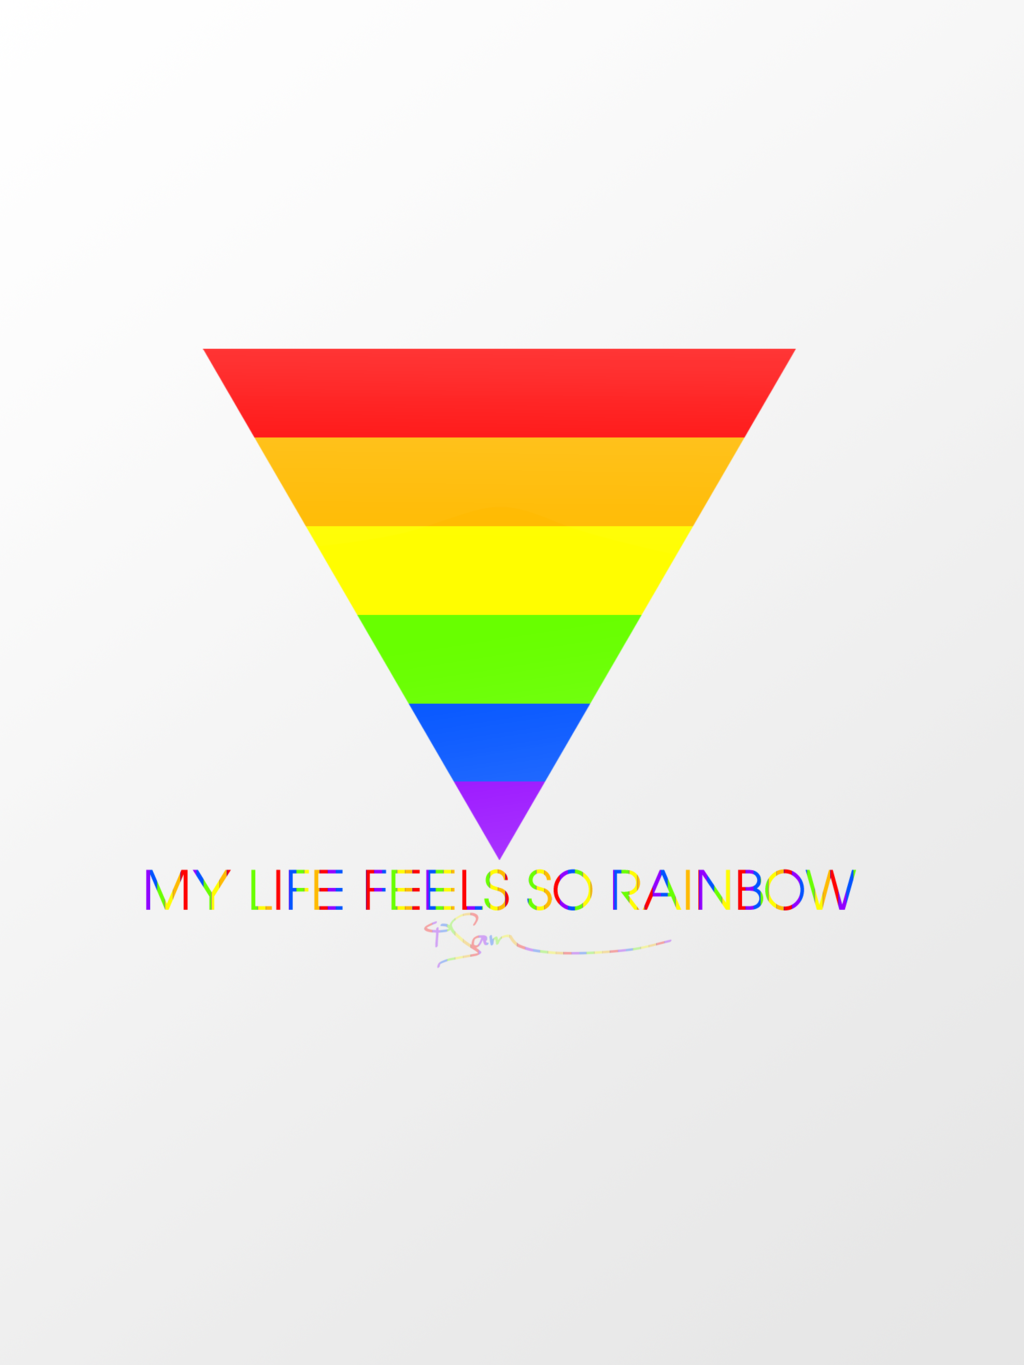 Free download MY LIFE FEELS LIKE RAINBOW LGBT SUPPORT by Samscheetah [1024x1365] for your Desktop, Mobile & Tablet. Explore Rainbow LGBT Wallpaper. Rainbow LGBT Wallpaper, Lgbt Wallpaper, LGBT Wallpaper